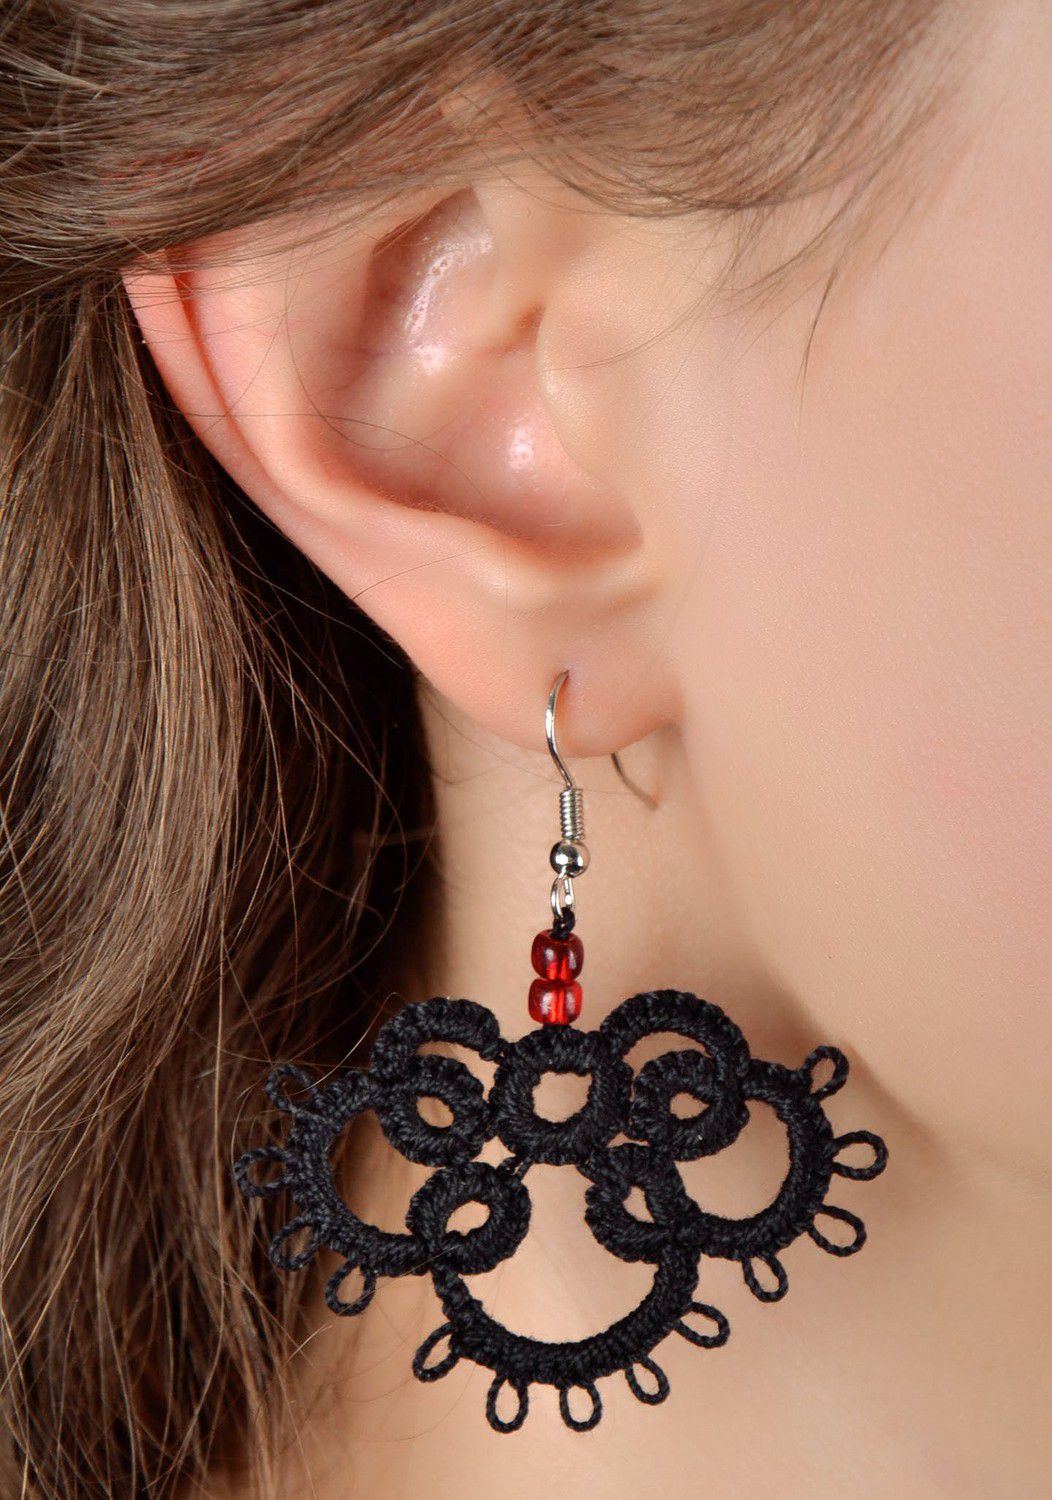 Earrings made from woven lace Black Clover photo 4